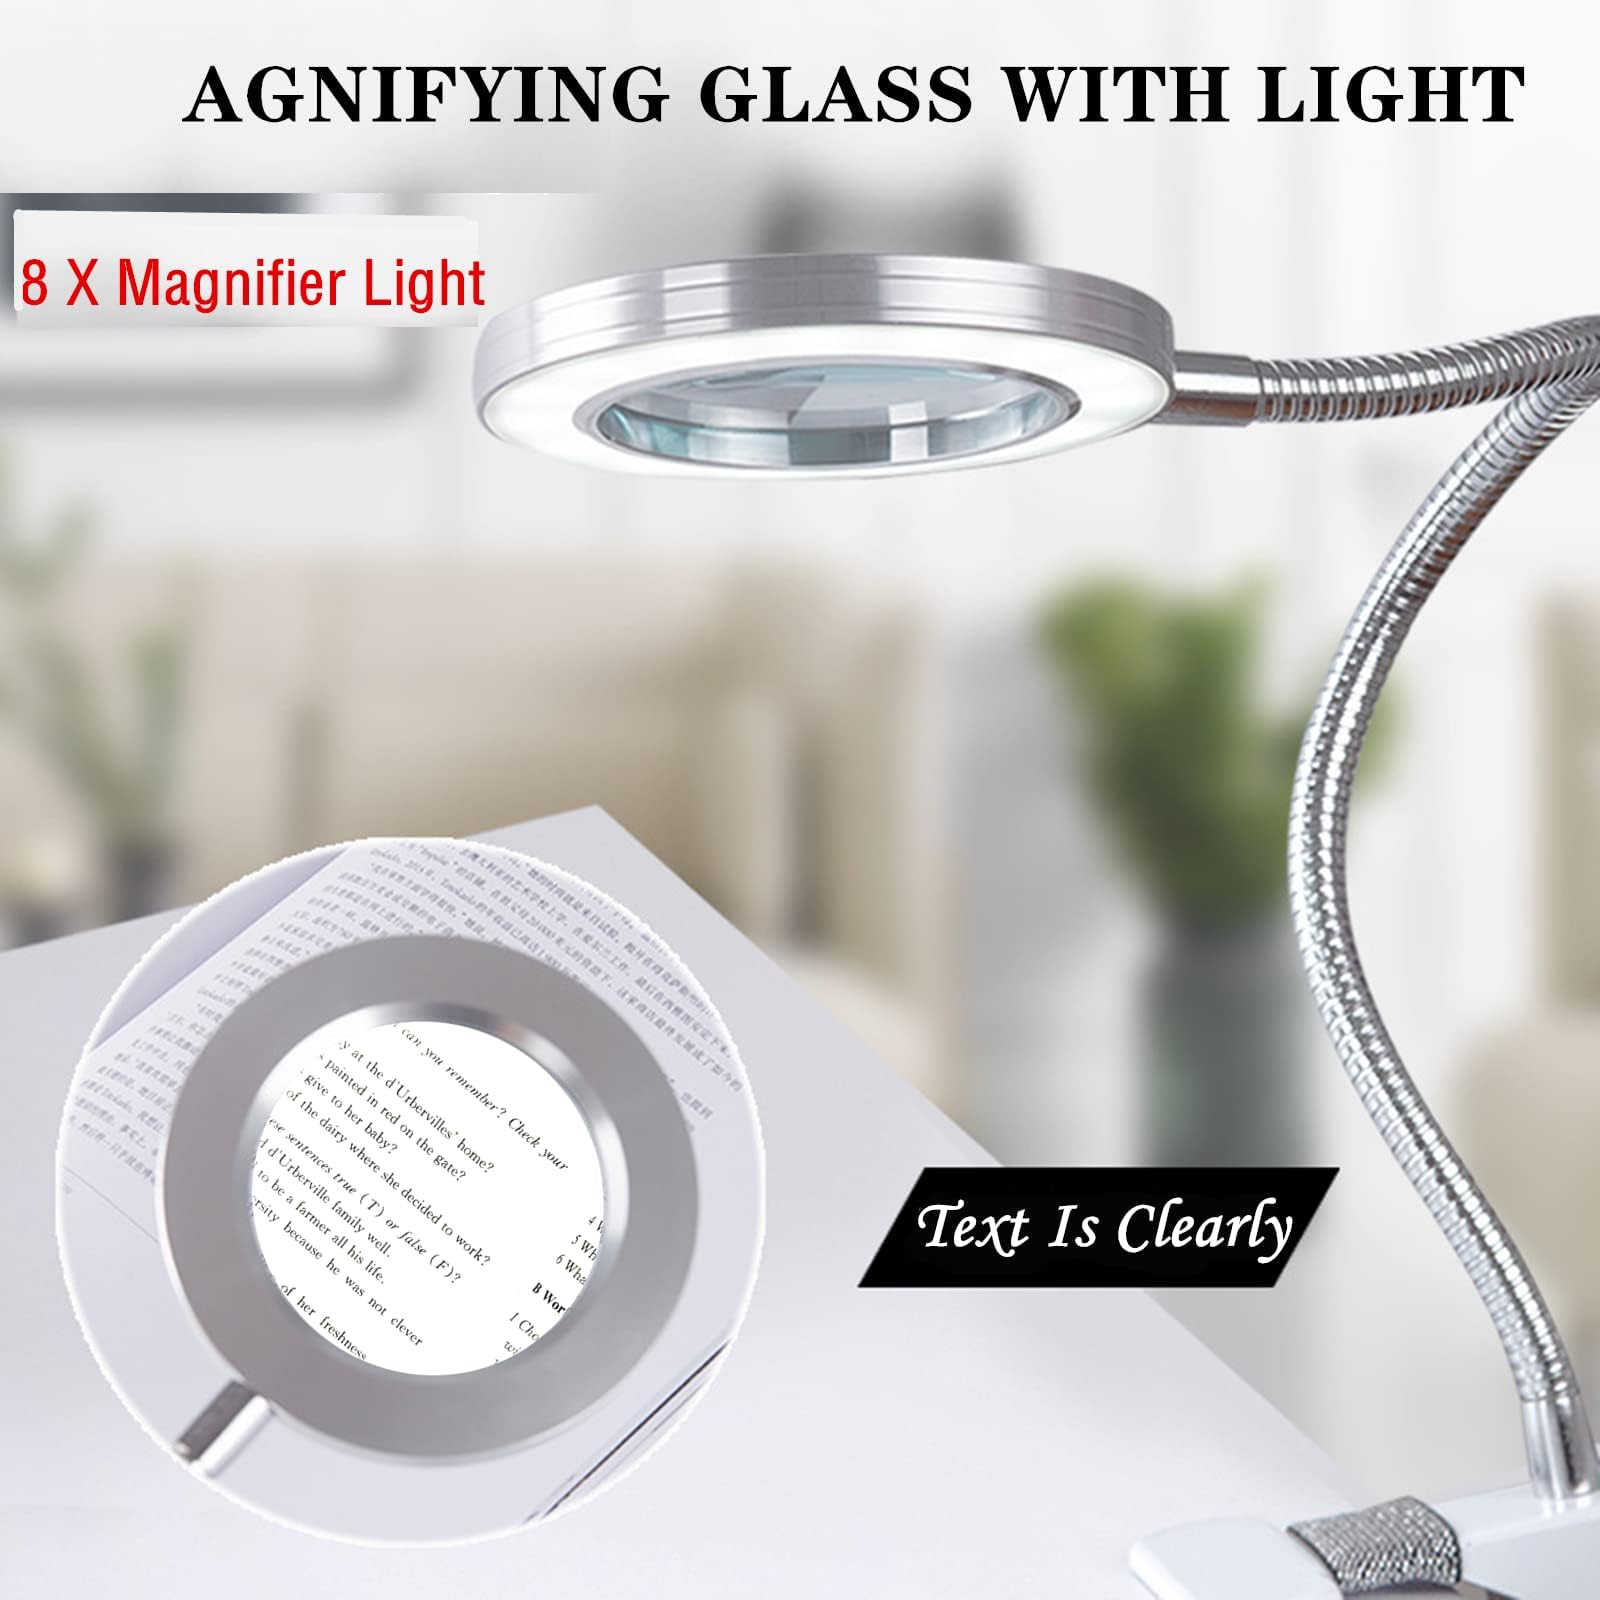 Magnifying Glass with Light and Stand, Desk Lamp LED Light with USB Powered,Adjustable Flexible Gooseneck,Clip on Desktop & Bed for Reading, Crafts;Studio for Daily Hobbies Repairing.